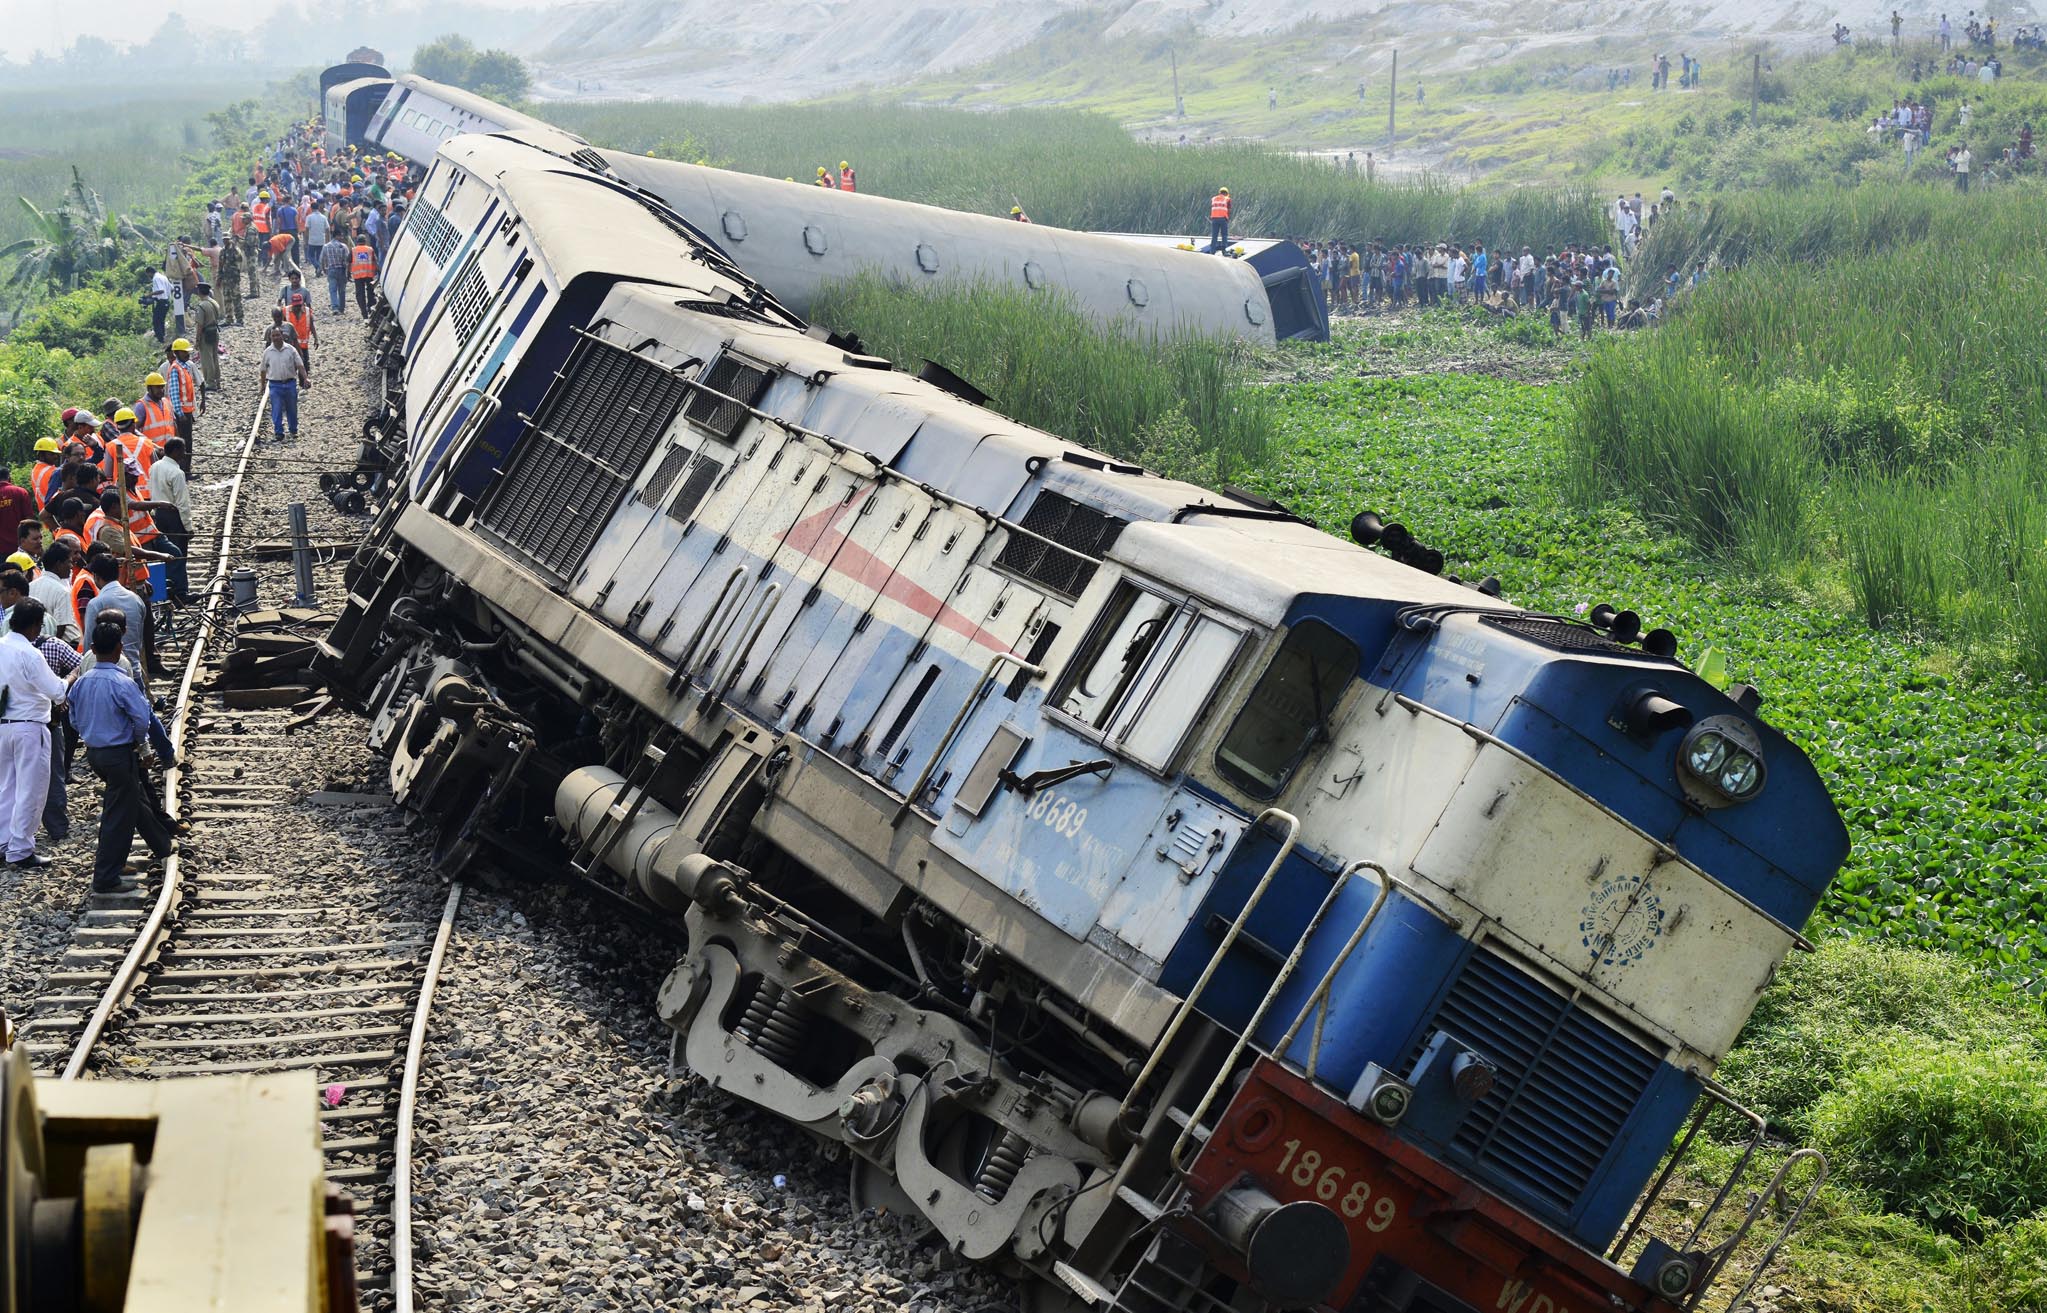 Train crash in Kanpur injures 61, raises concerns about India’s aging railways